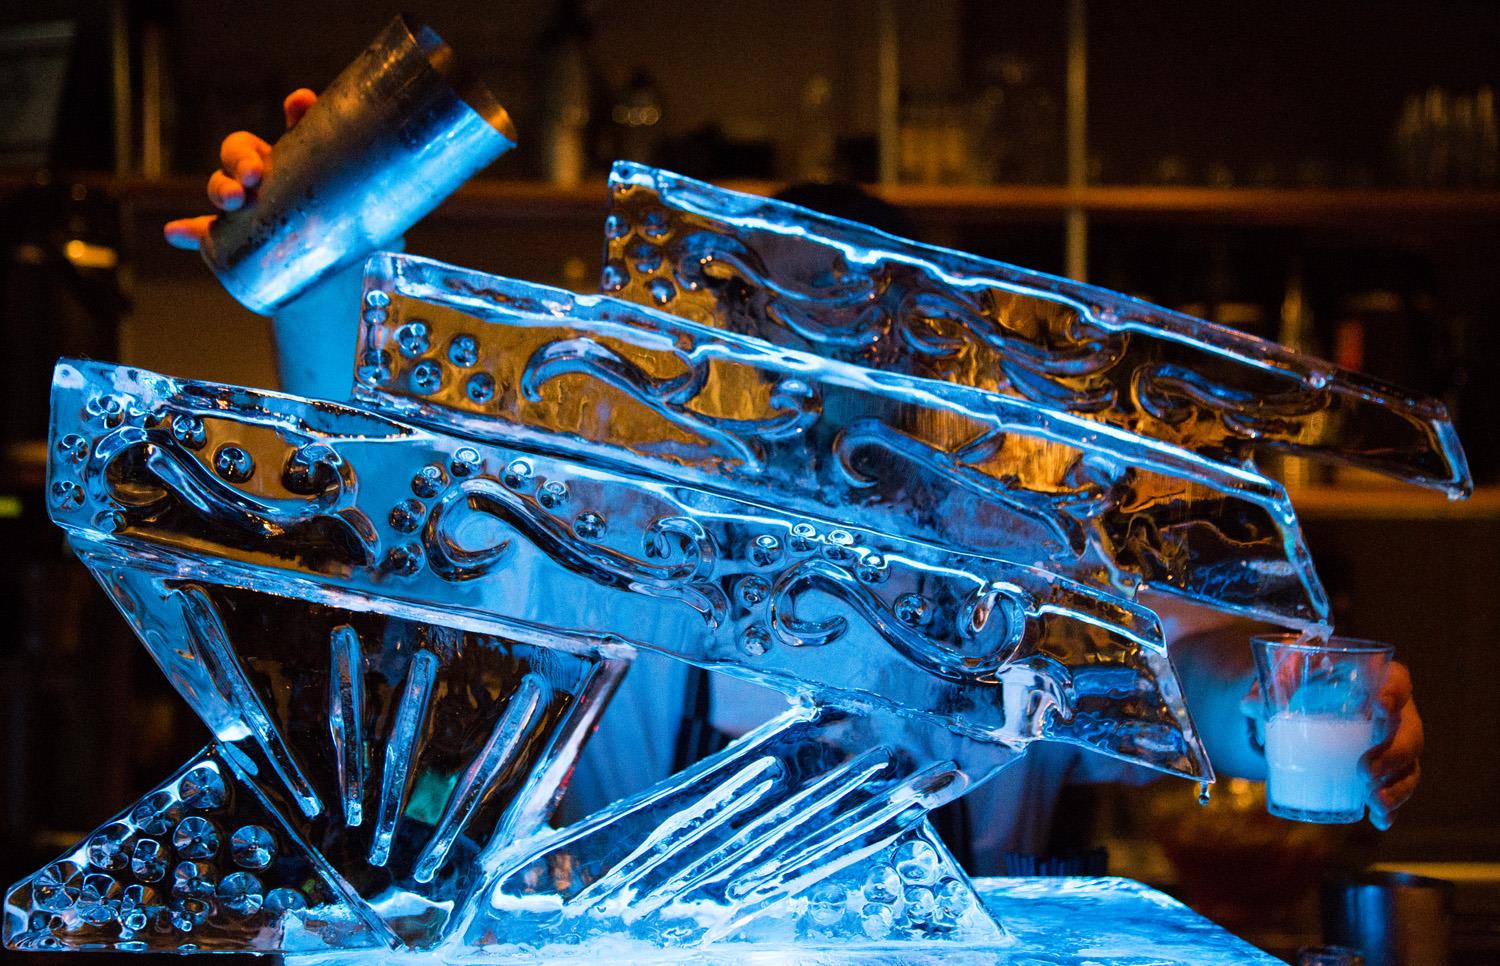 Ice luge drinks are back: Here's where to try the trend